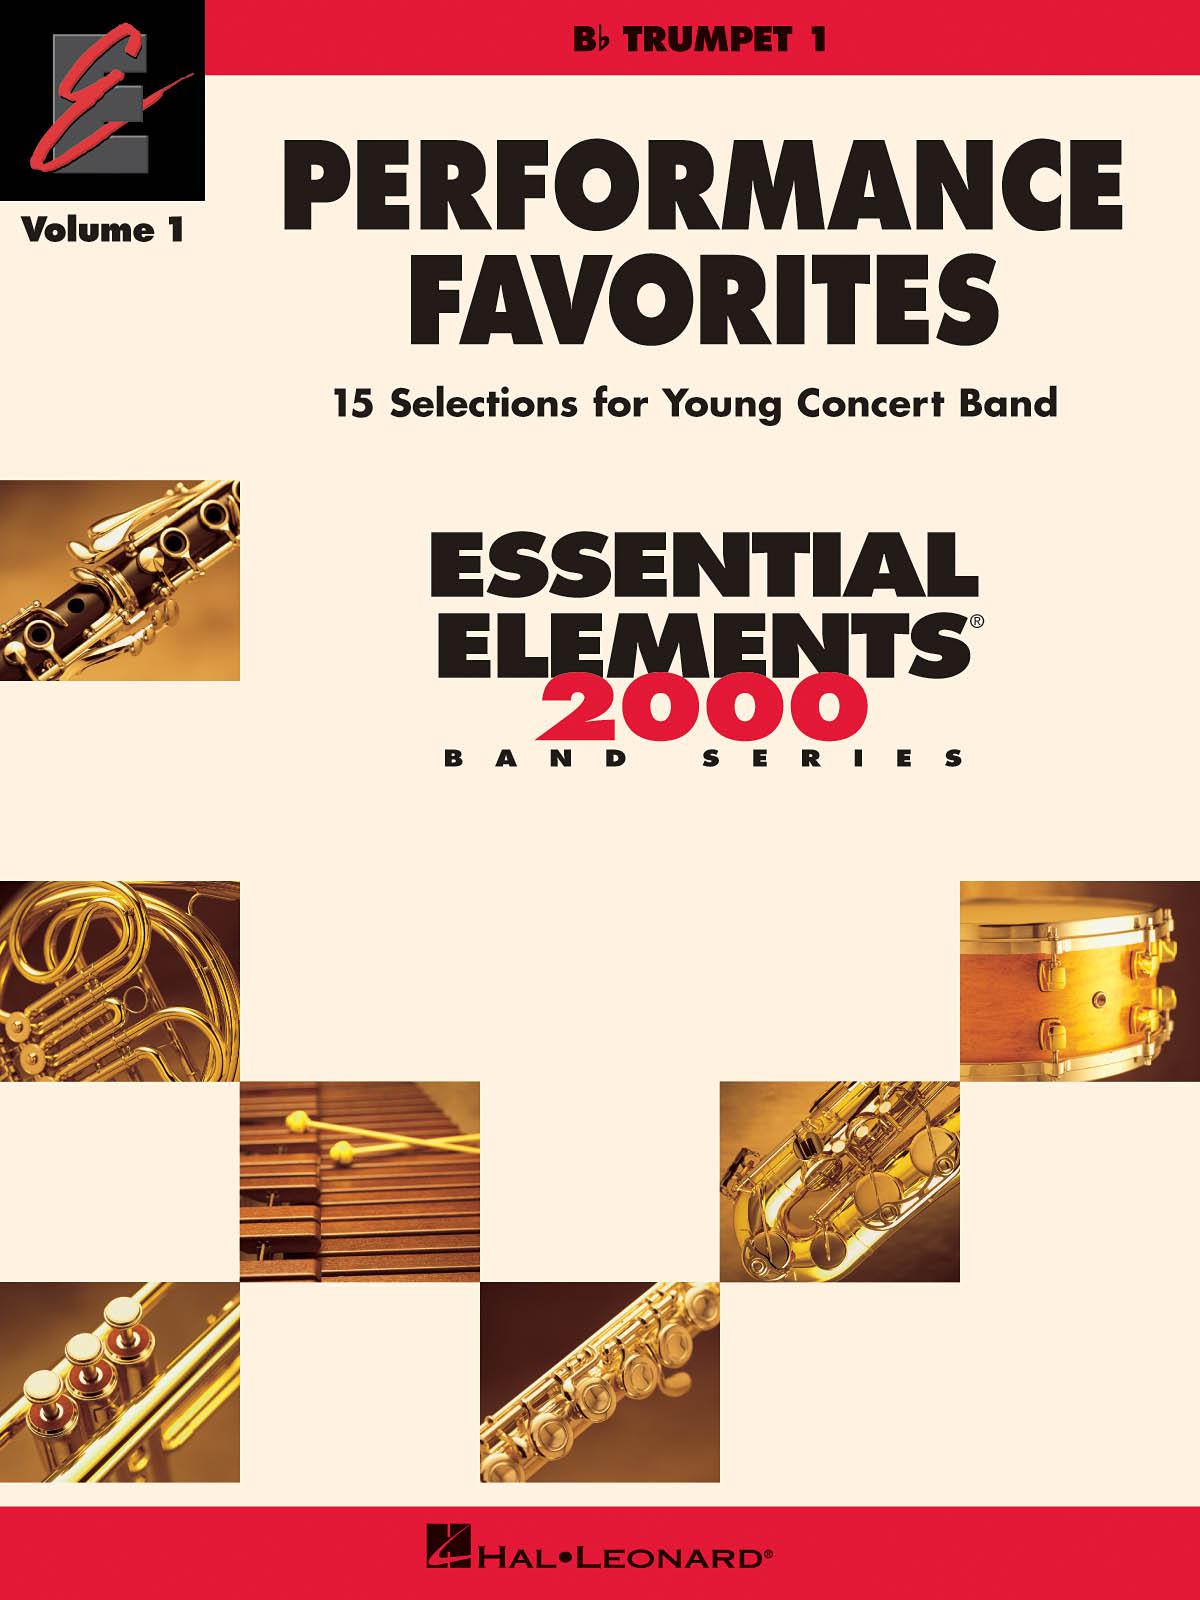 Performance Favorites Vol. 1 - Trumpet 1 - 15 Selections for Young Concert Band - noty na trubku